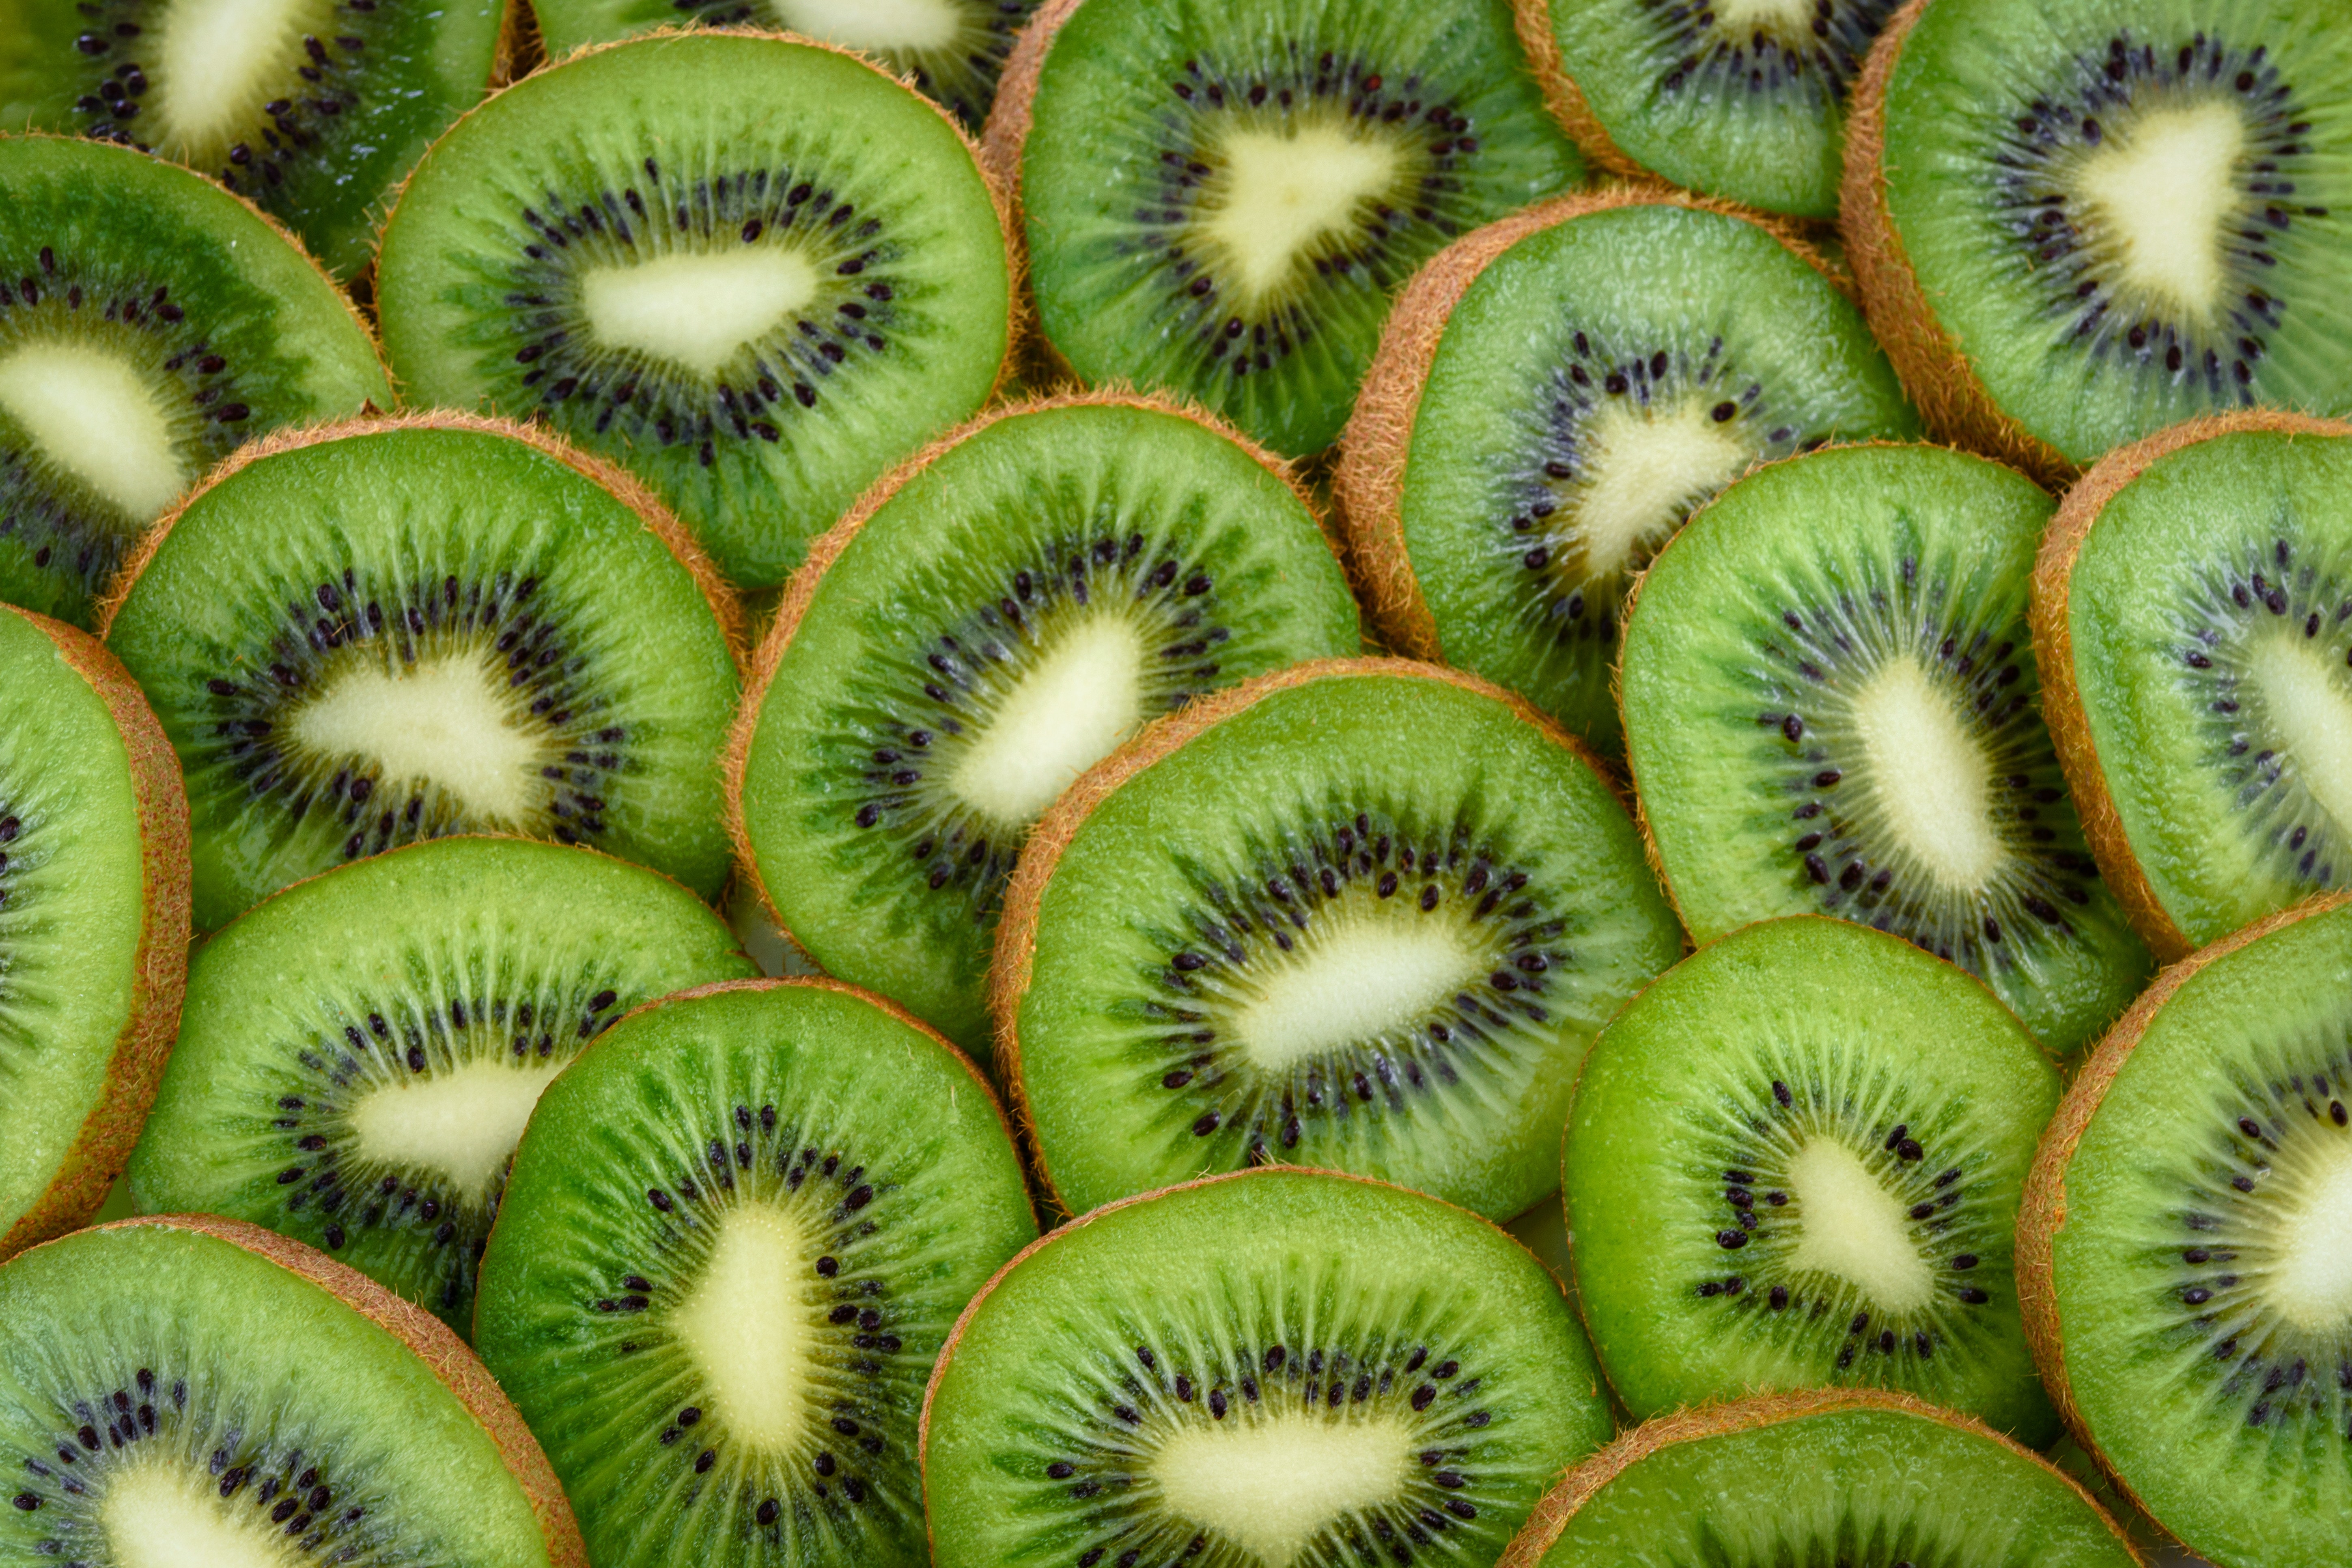 A pile of kiwis cut in half with seeds facing the camera.